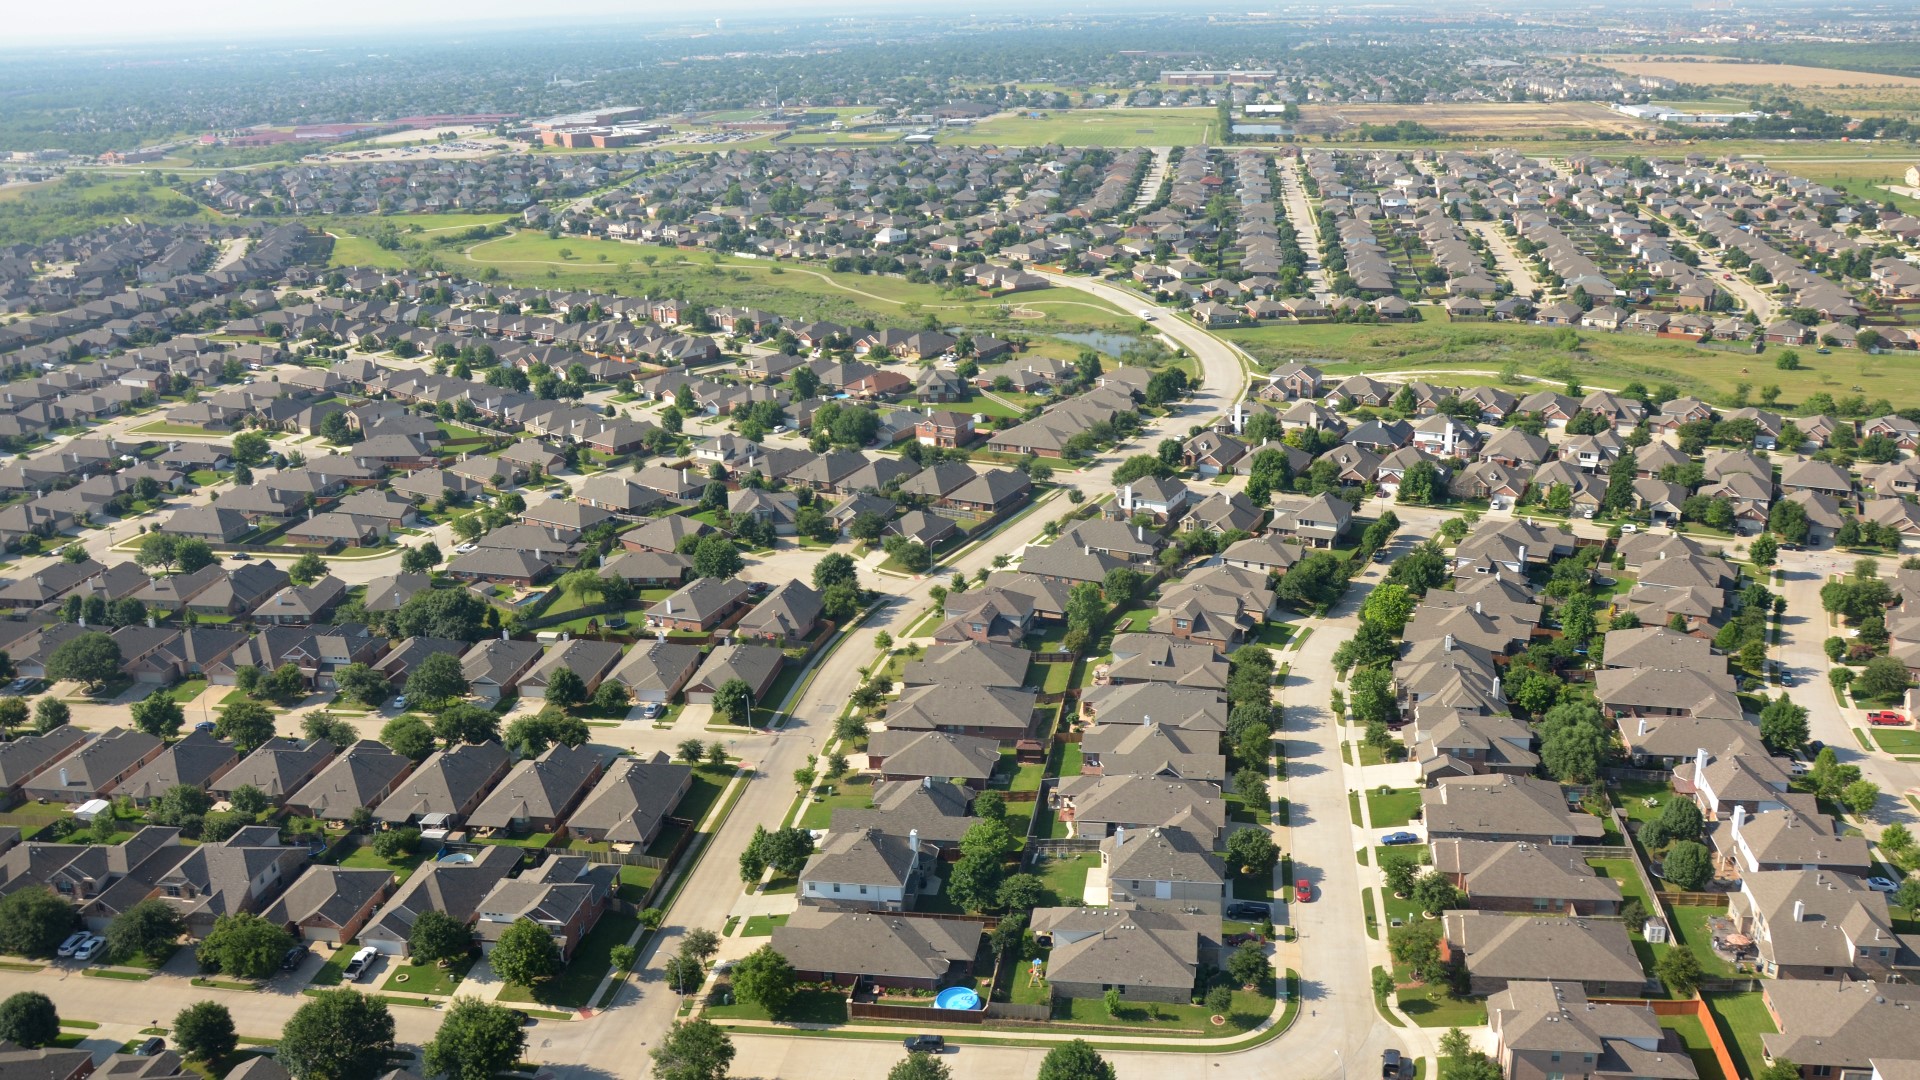 Permits to build houses in are down 38% in Celina, 32% in Frisco, and 26% in McKinney through the first 10 months of this year compared to the same period in 2021.